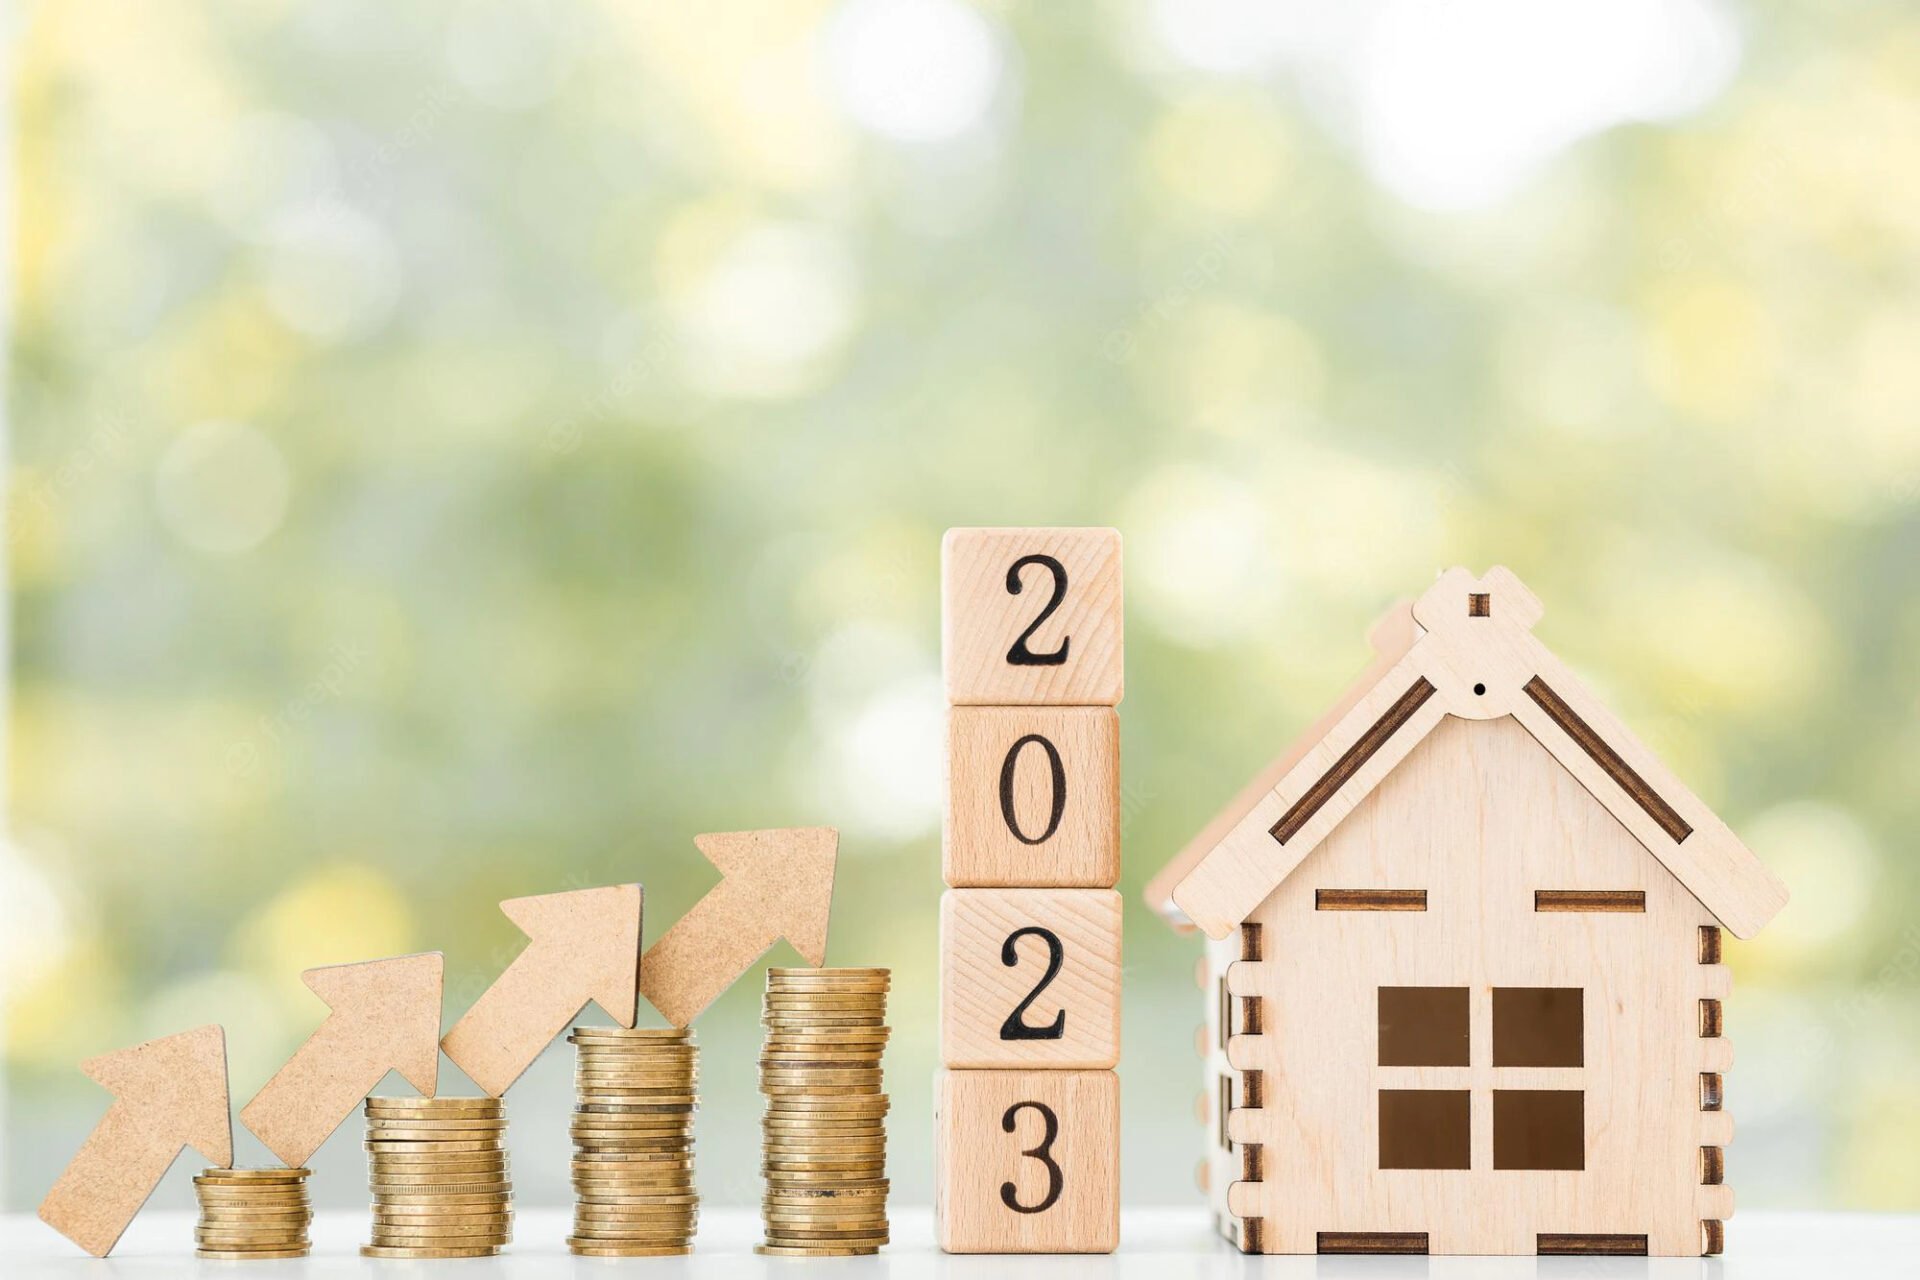 Real Estate Trends for 2023 as Predicted by the Experts